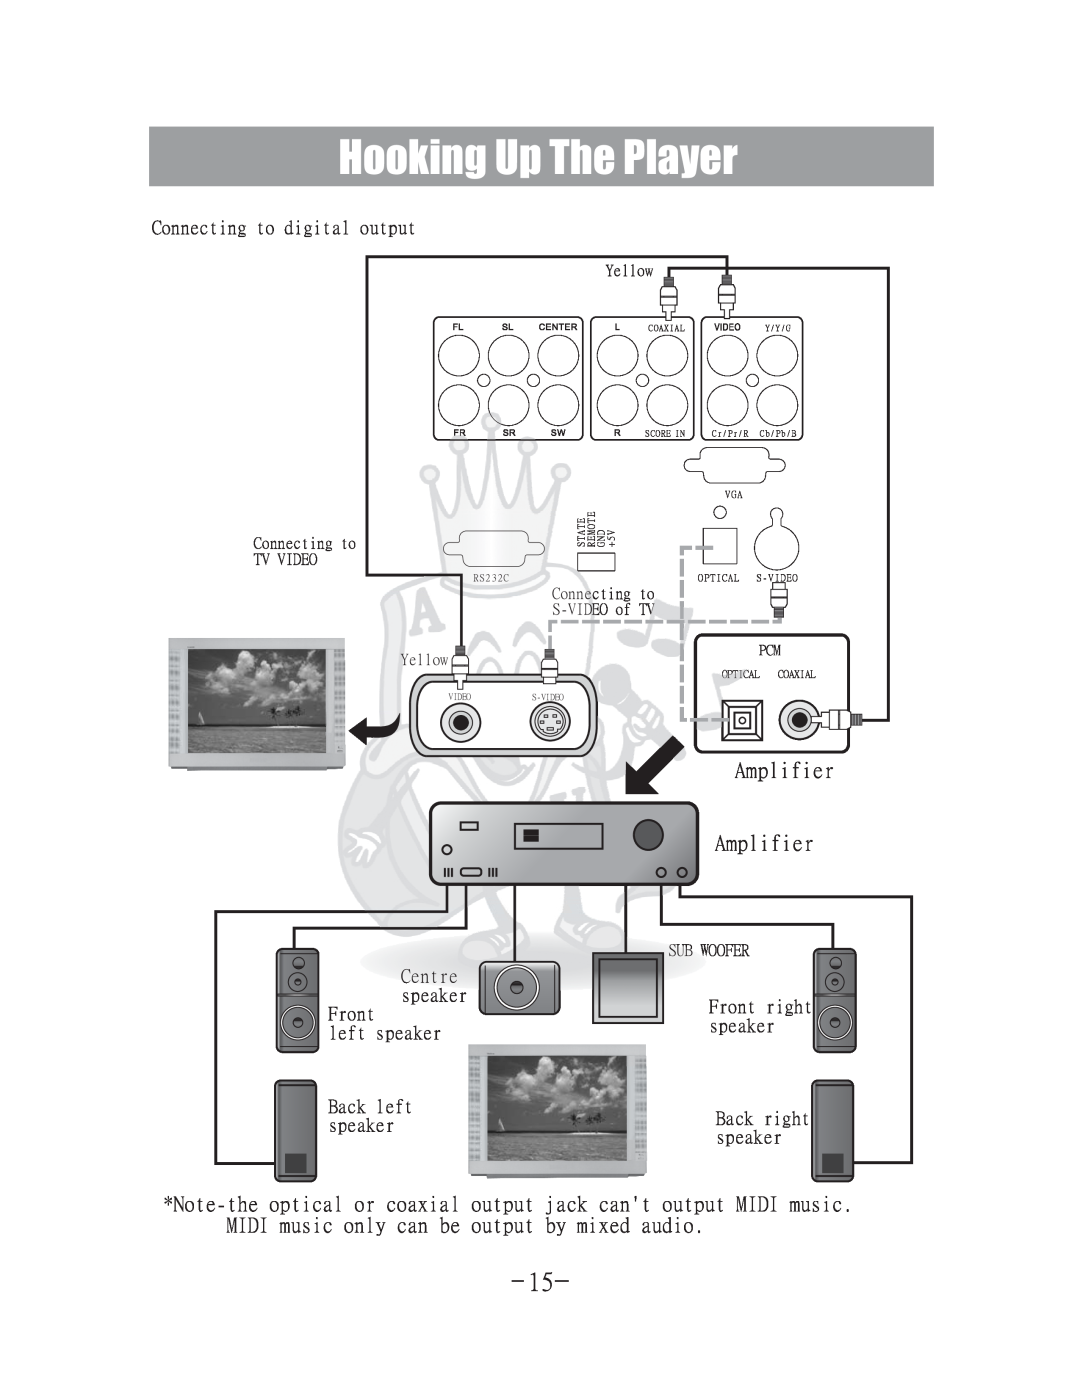 Acesonic DGX-400 user manual Hooking Up The Player, Amplifier Amplifier, Connecting to digital output, Back left speaker 